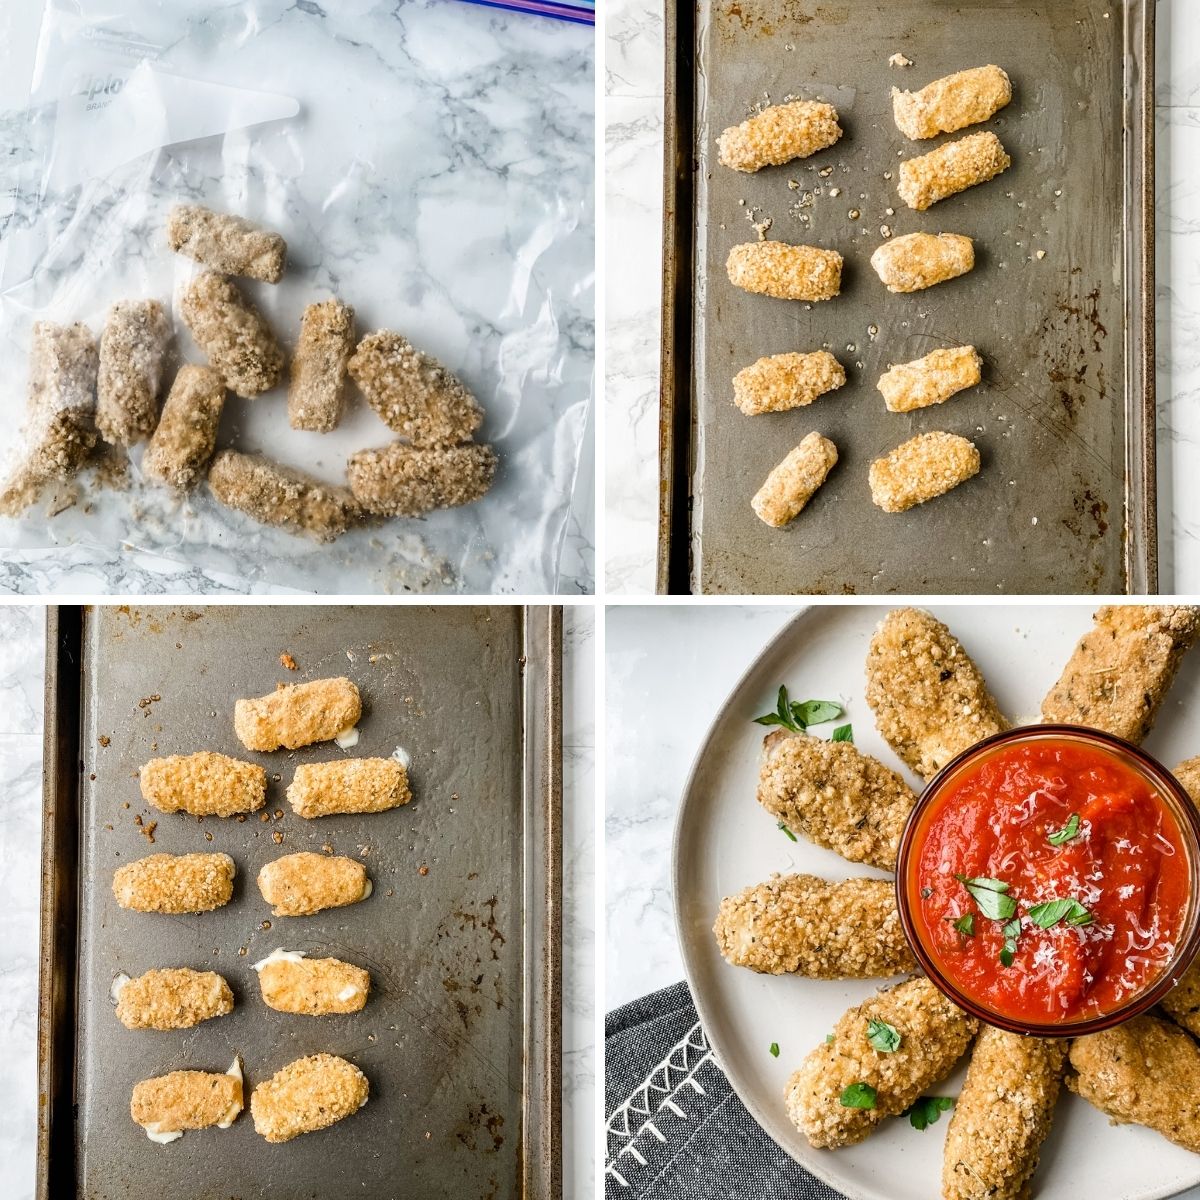 A collage showing the final steps to making baked mozzarella sticks.